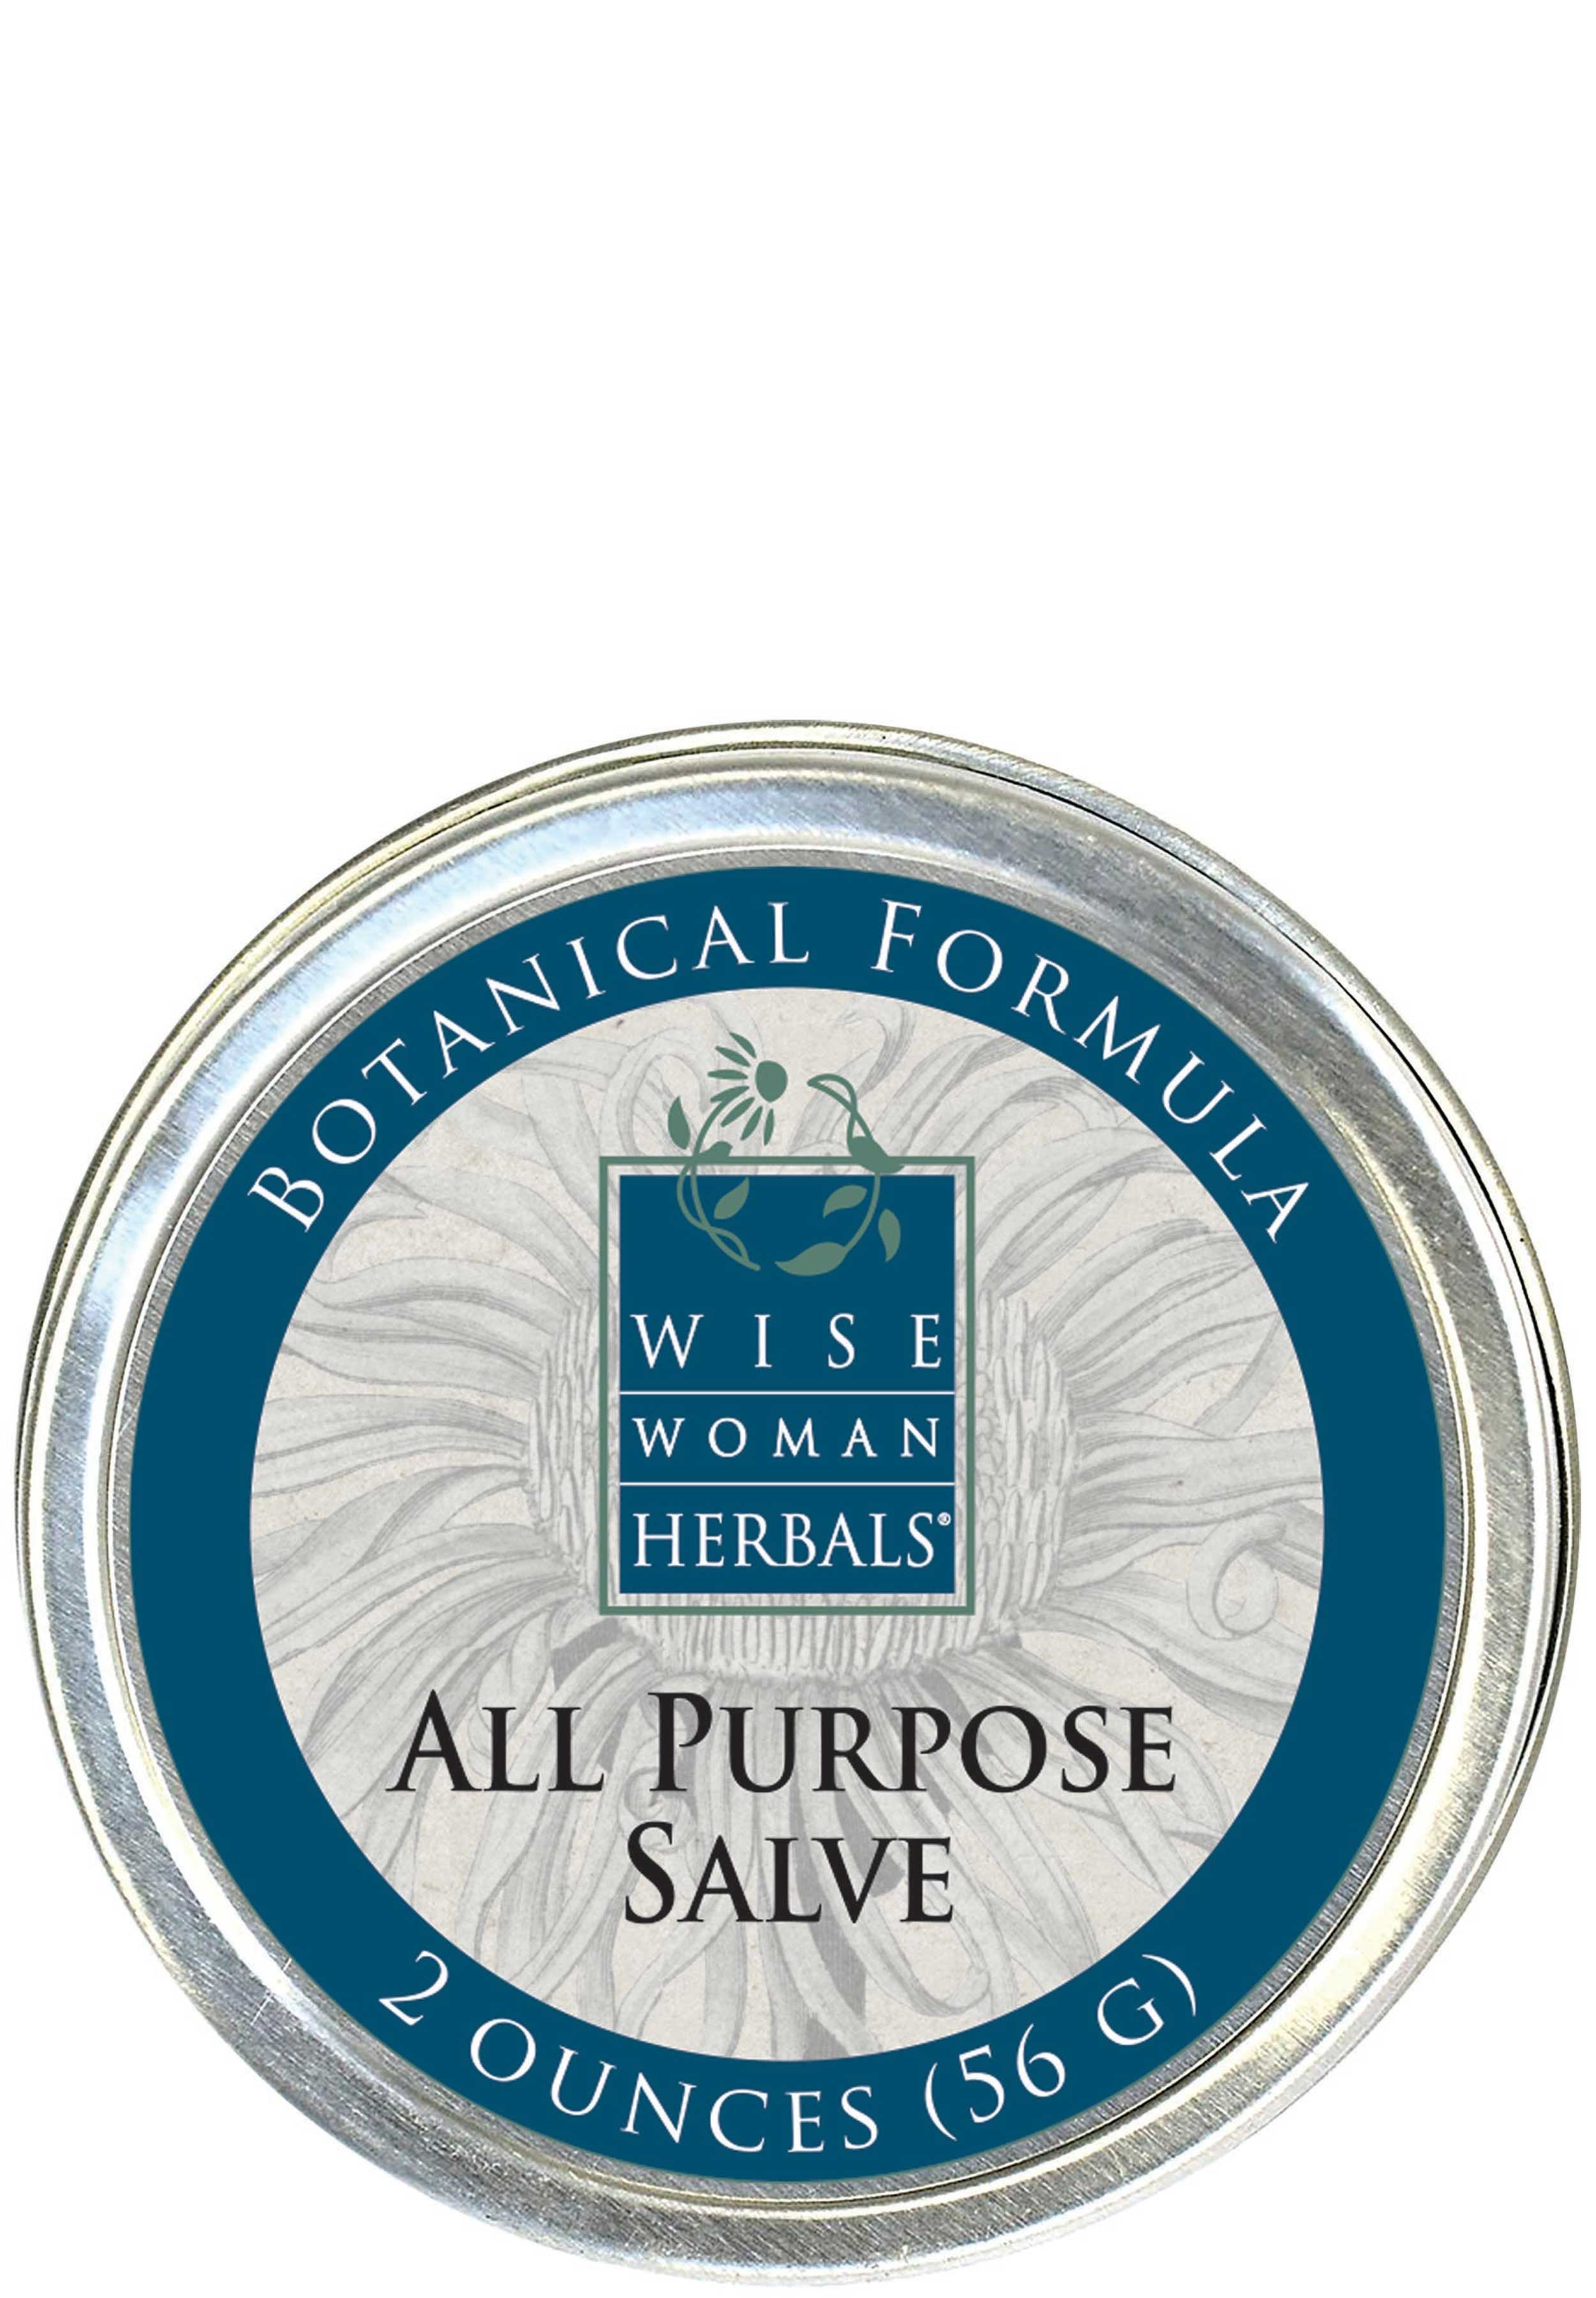 Wise Woman Herbals All Purpose Salve